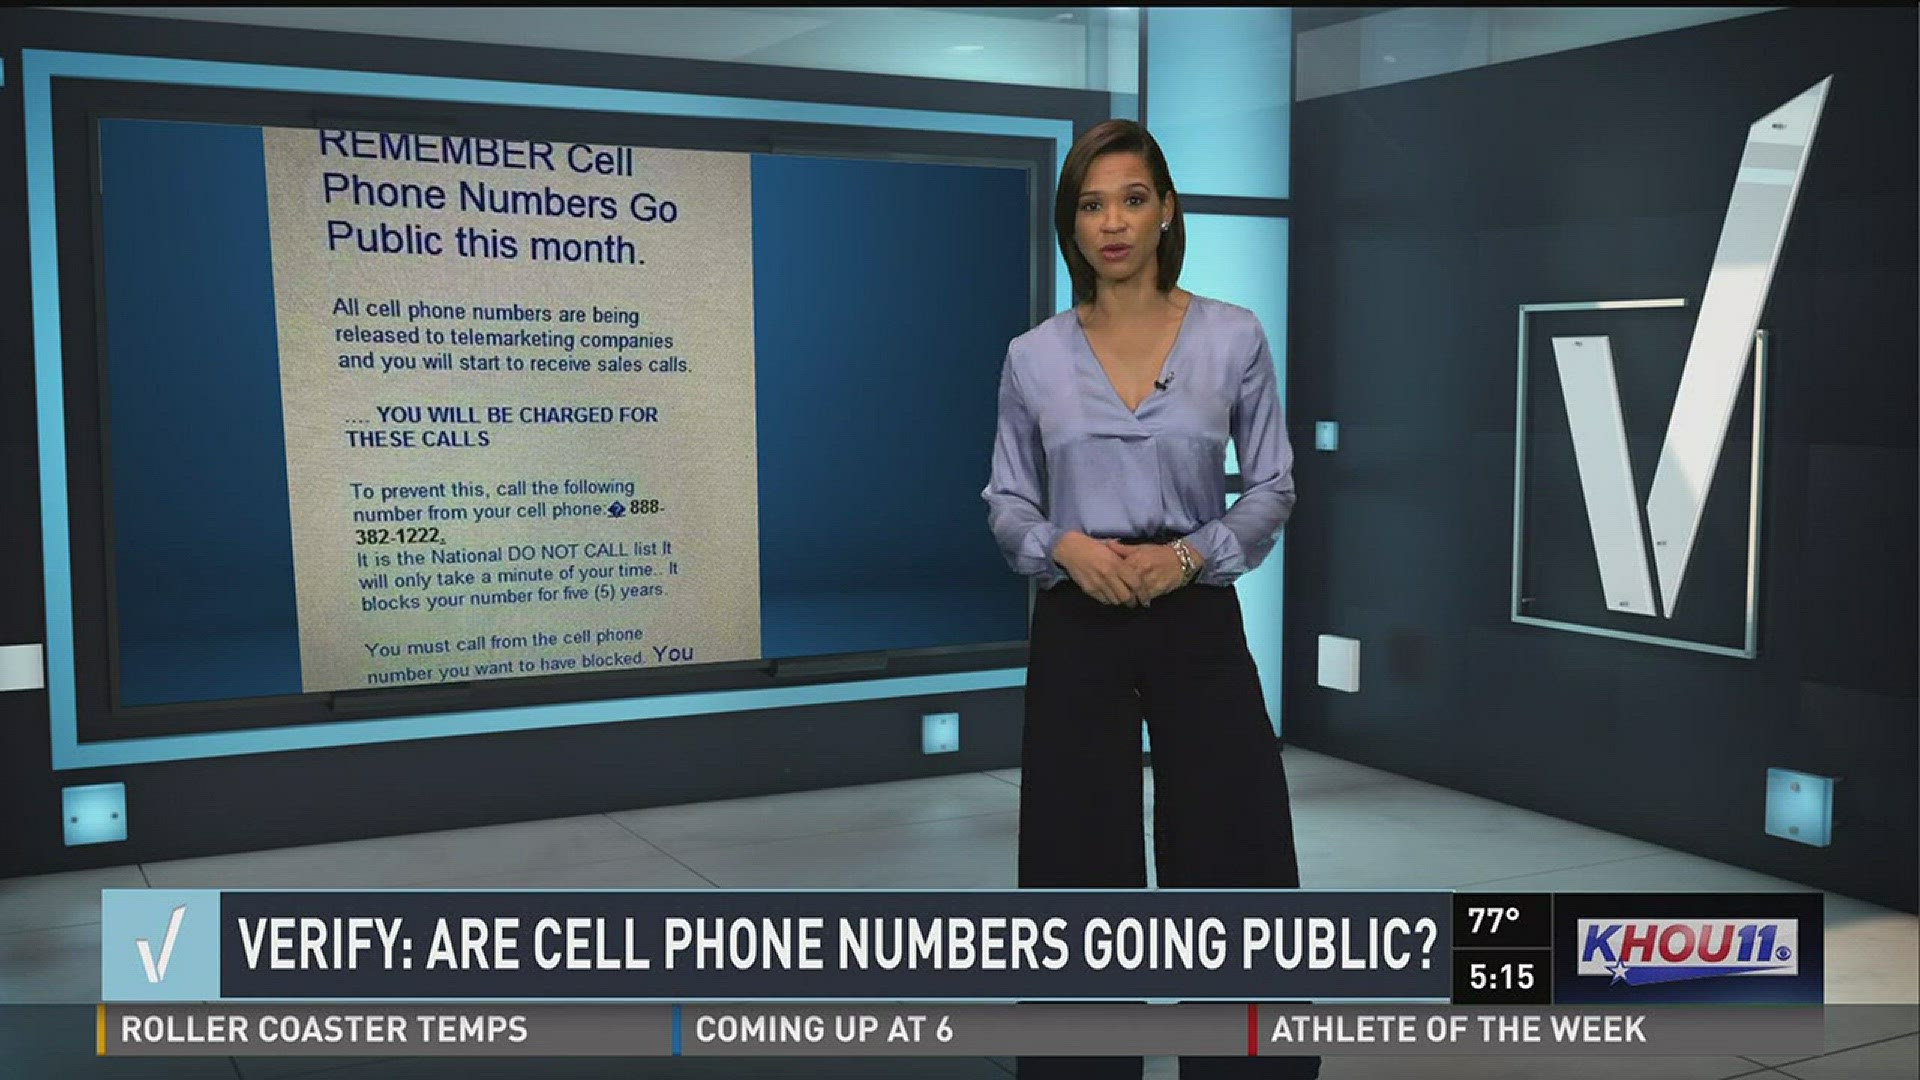 A KHOU 11 viewer emailed our Verify team about a viral Facebook post claiming cell phone numbers are going public this month. Is this claim true? You asked, we verified.